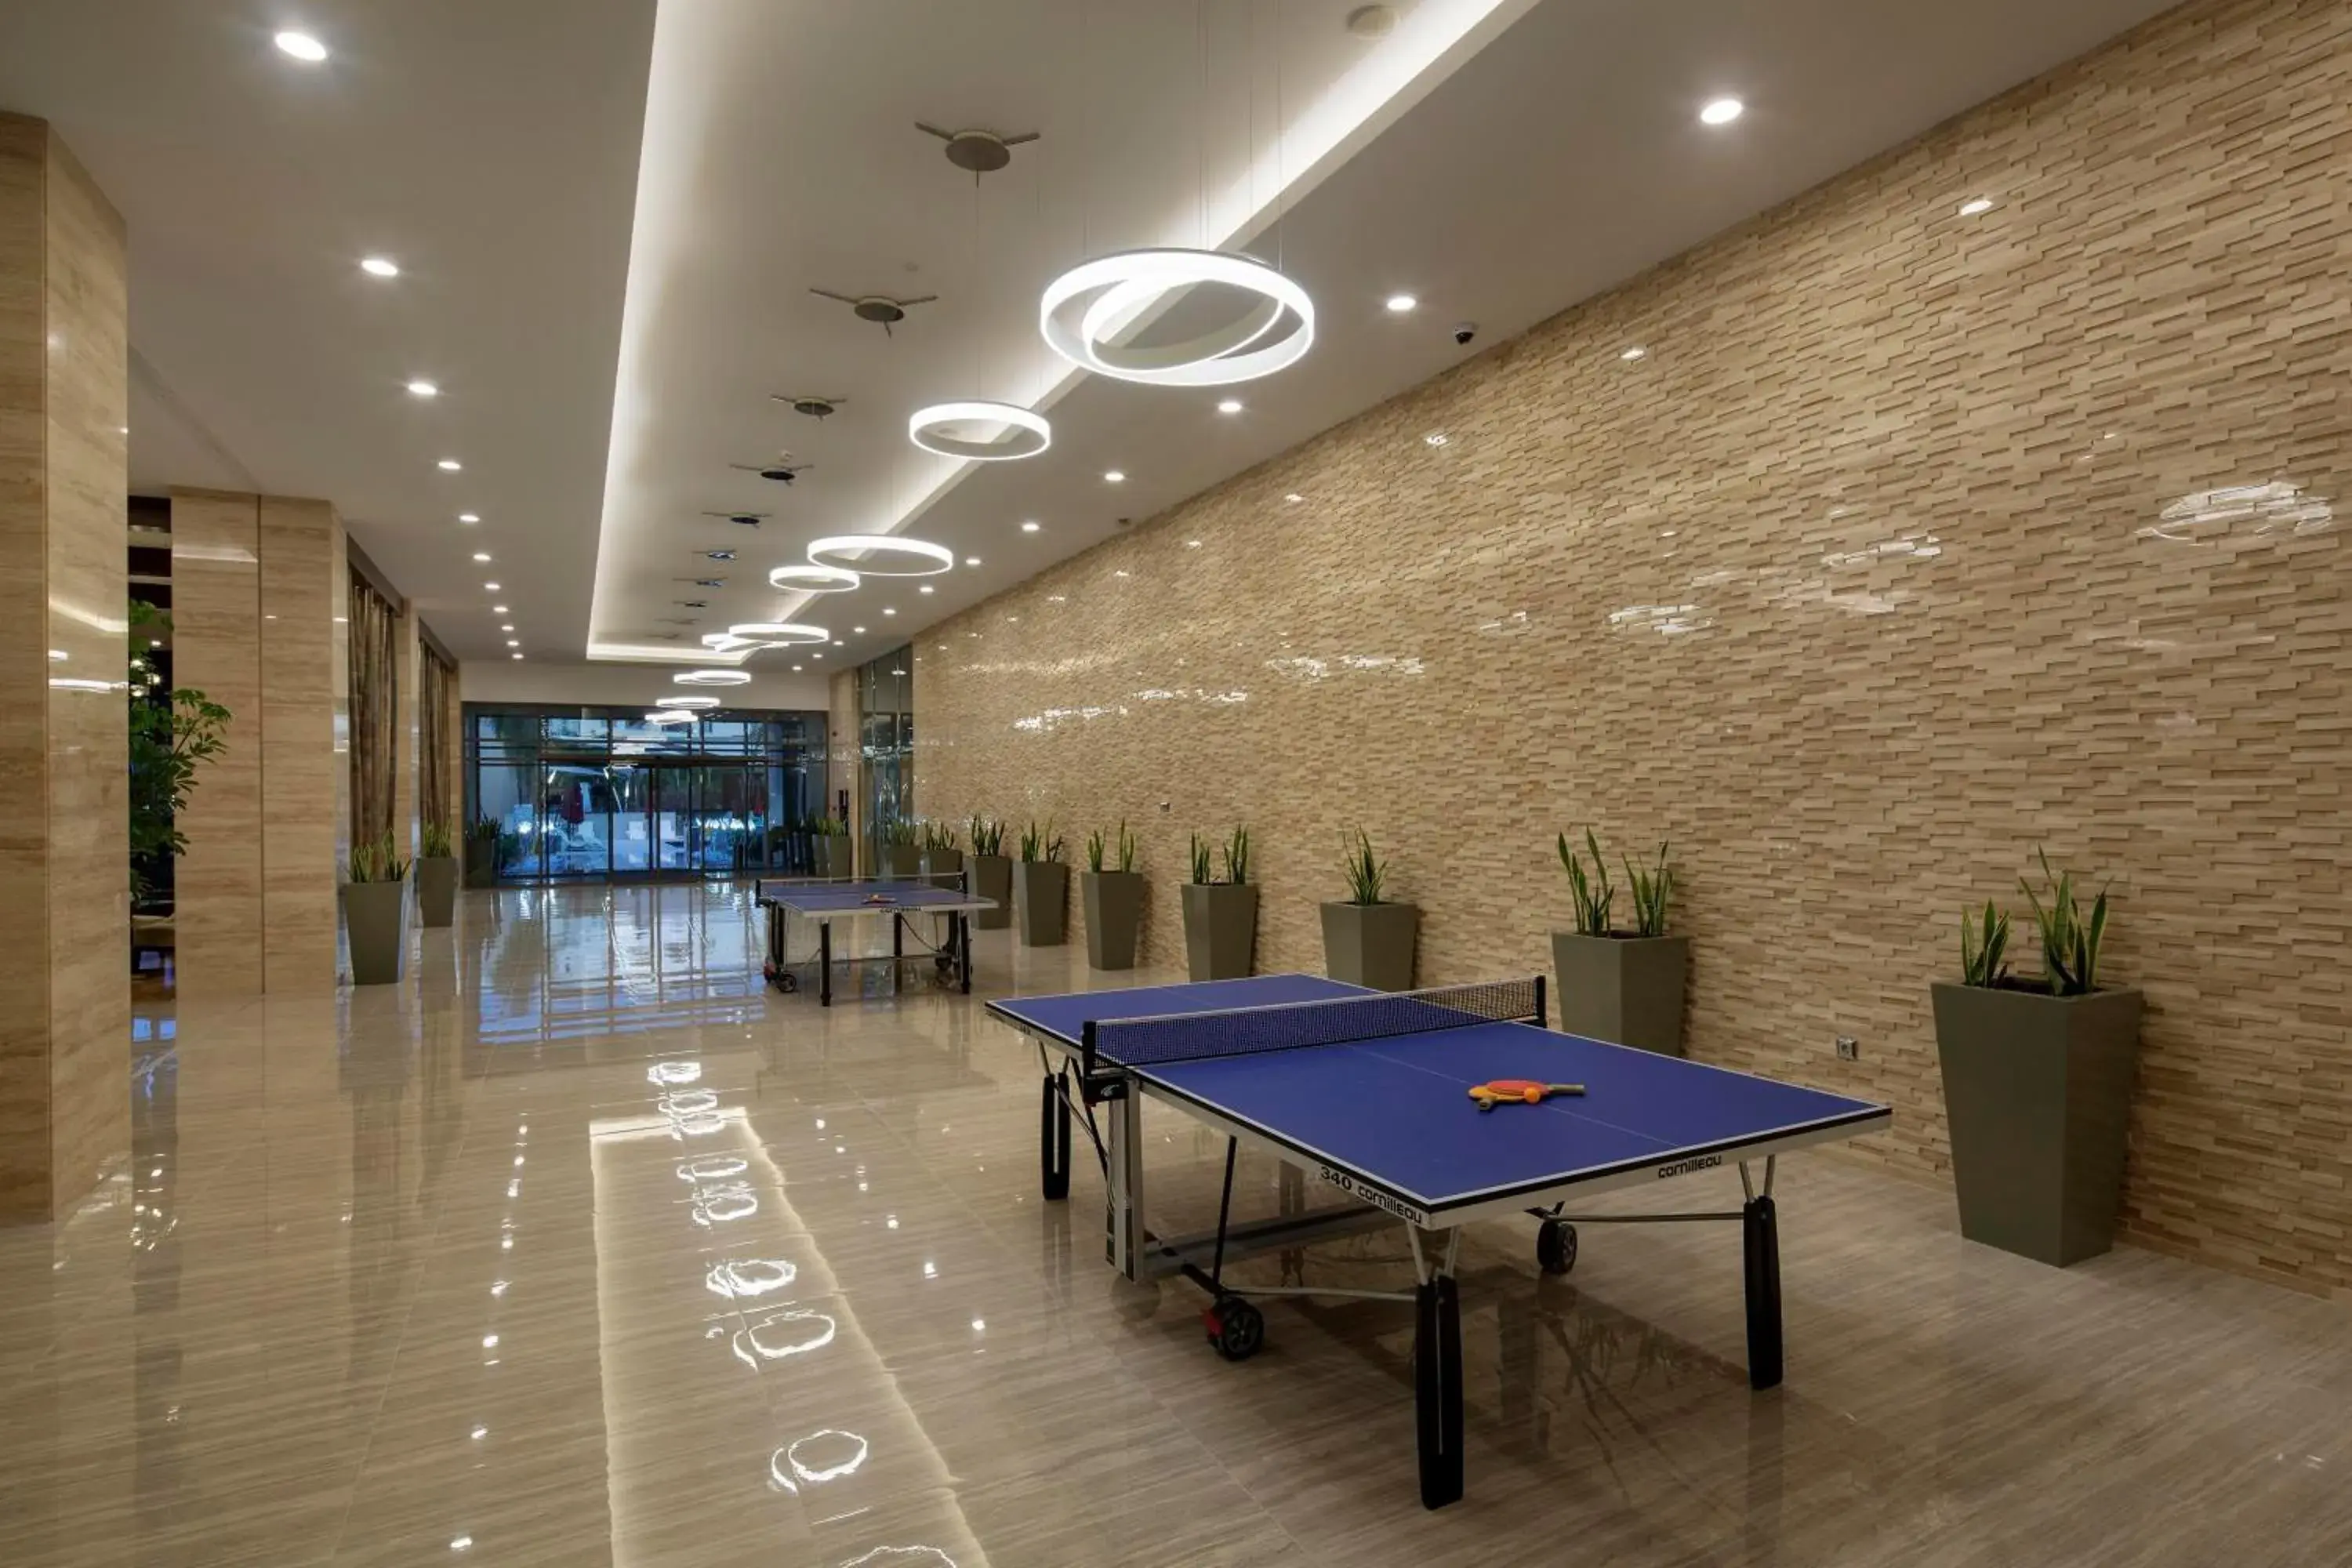 Game Room, Table Tennis in The Sense Deluxe Hotel